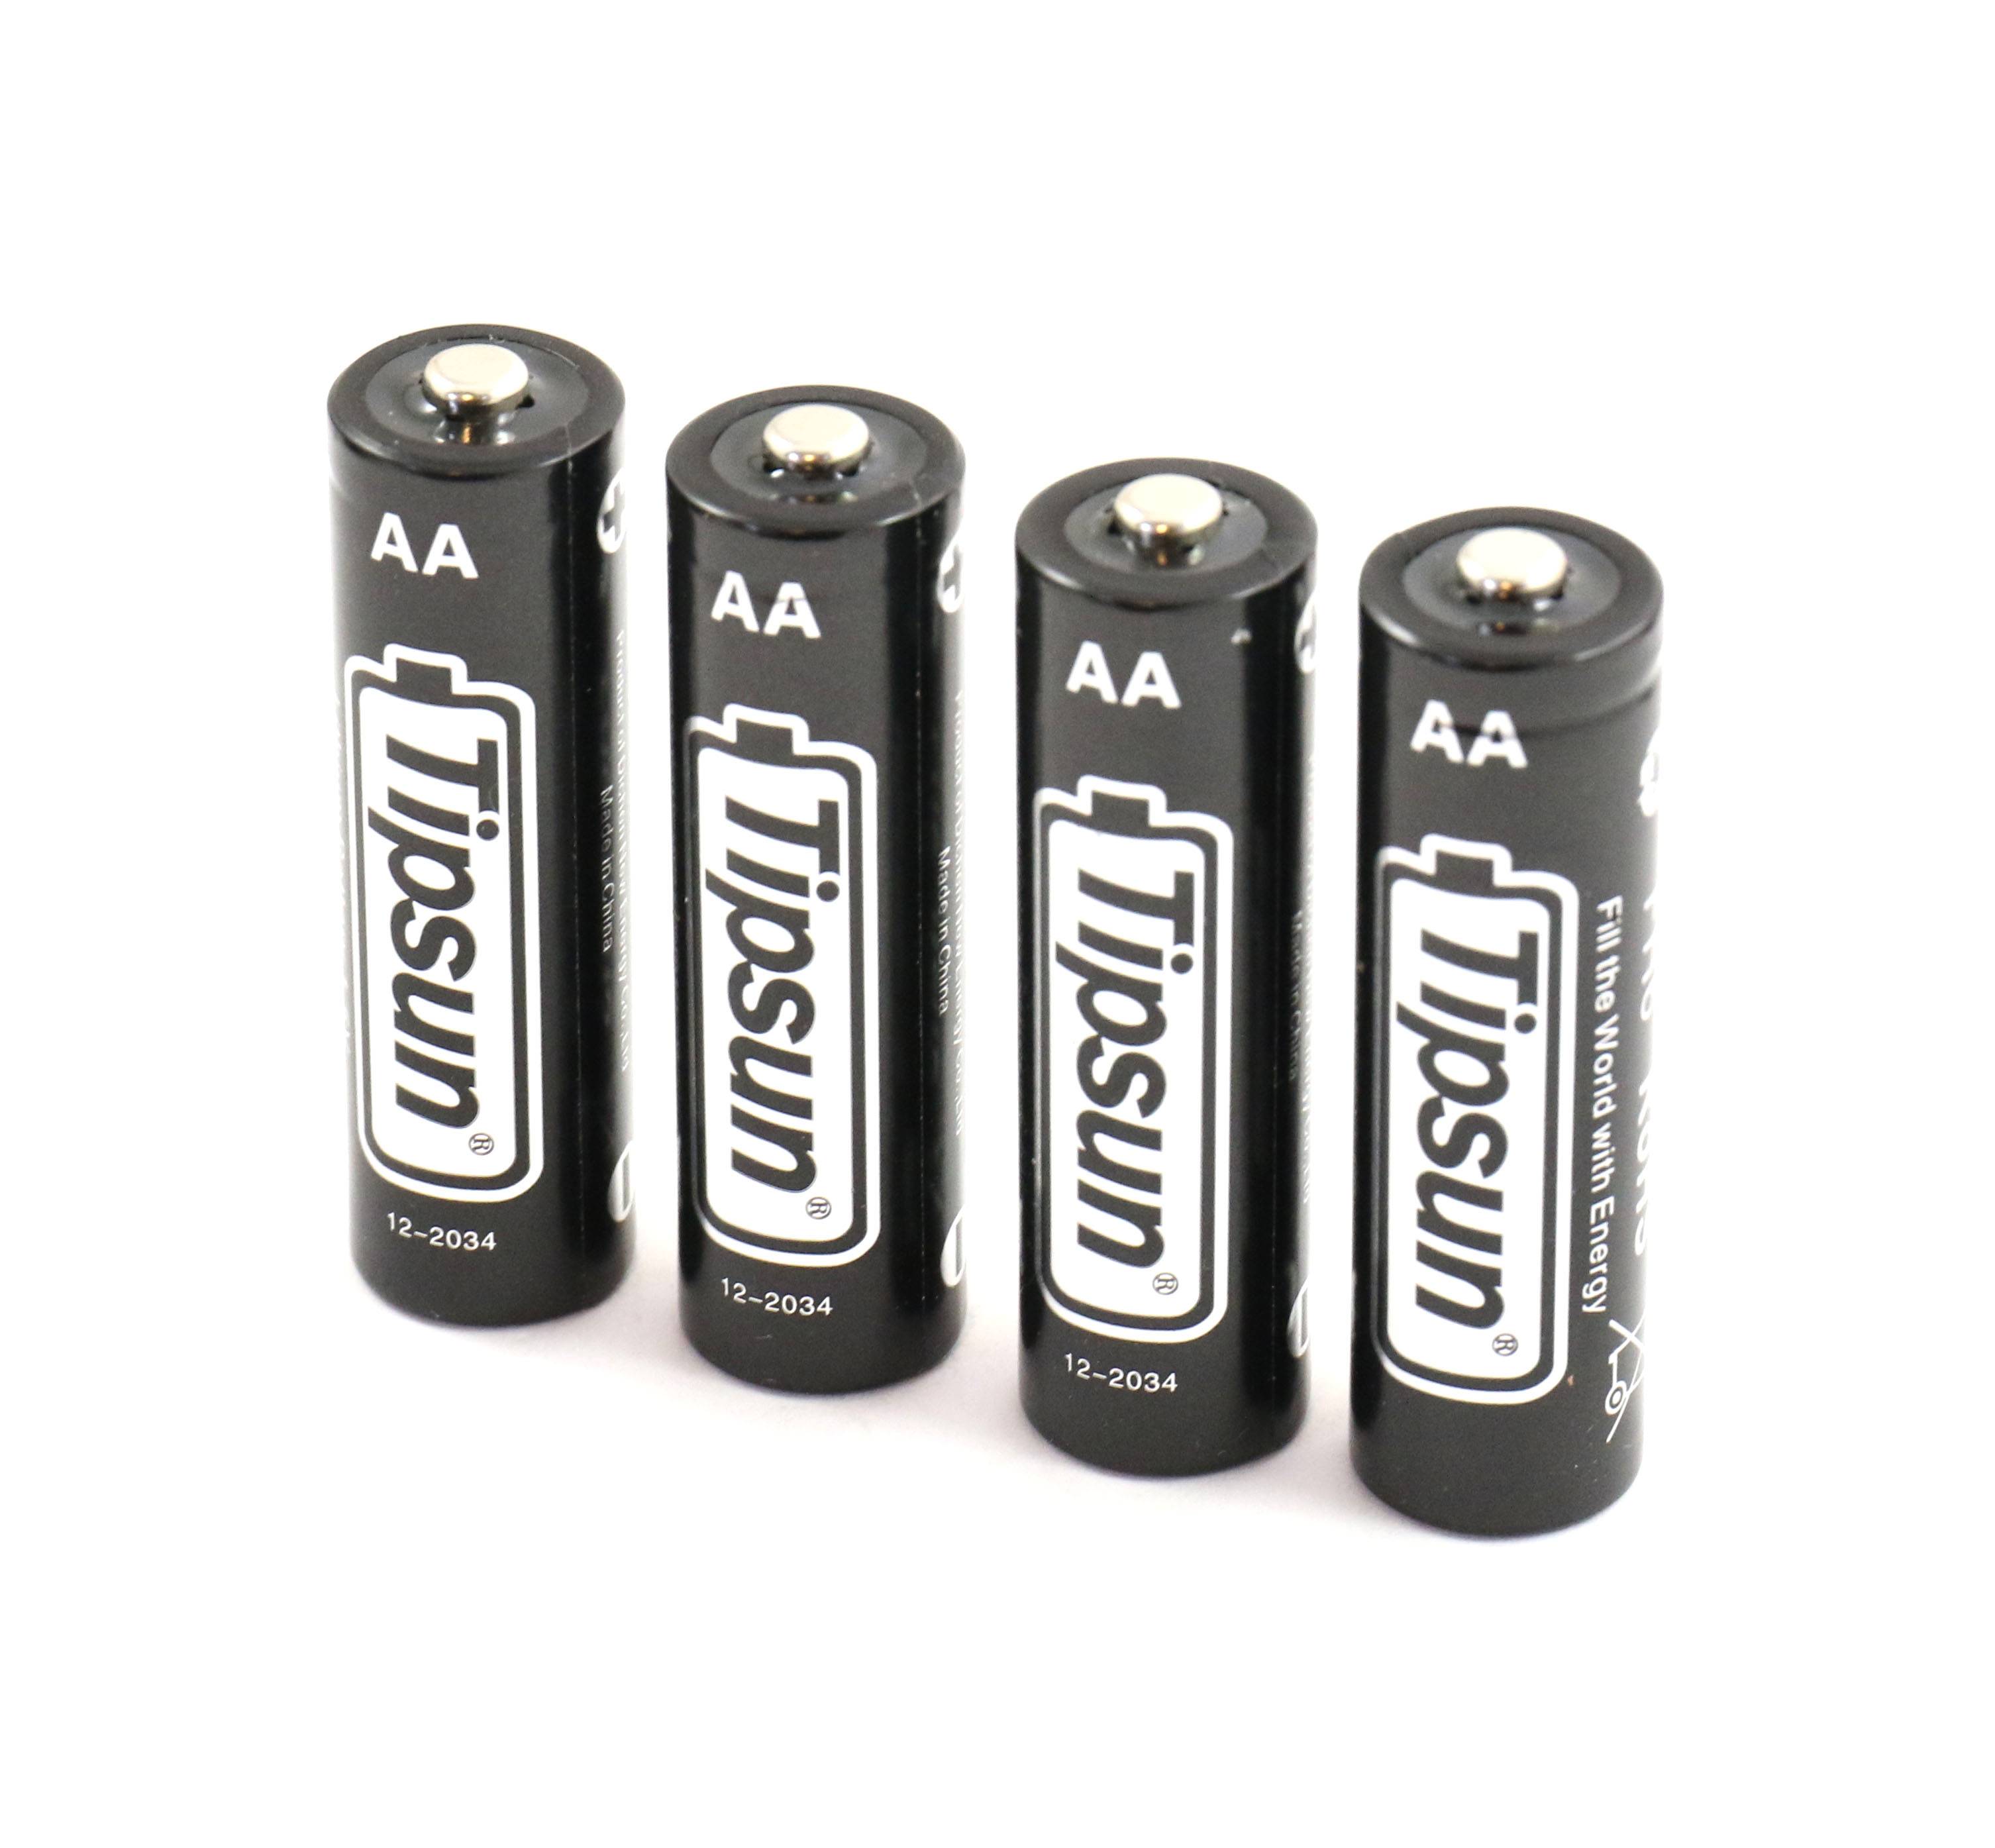 Longer Lasting Energy Double A Battery Tipsun AA Lithium Batteries 2900mAh Lithium Cells 12 Pack 